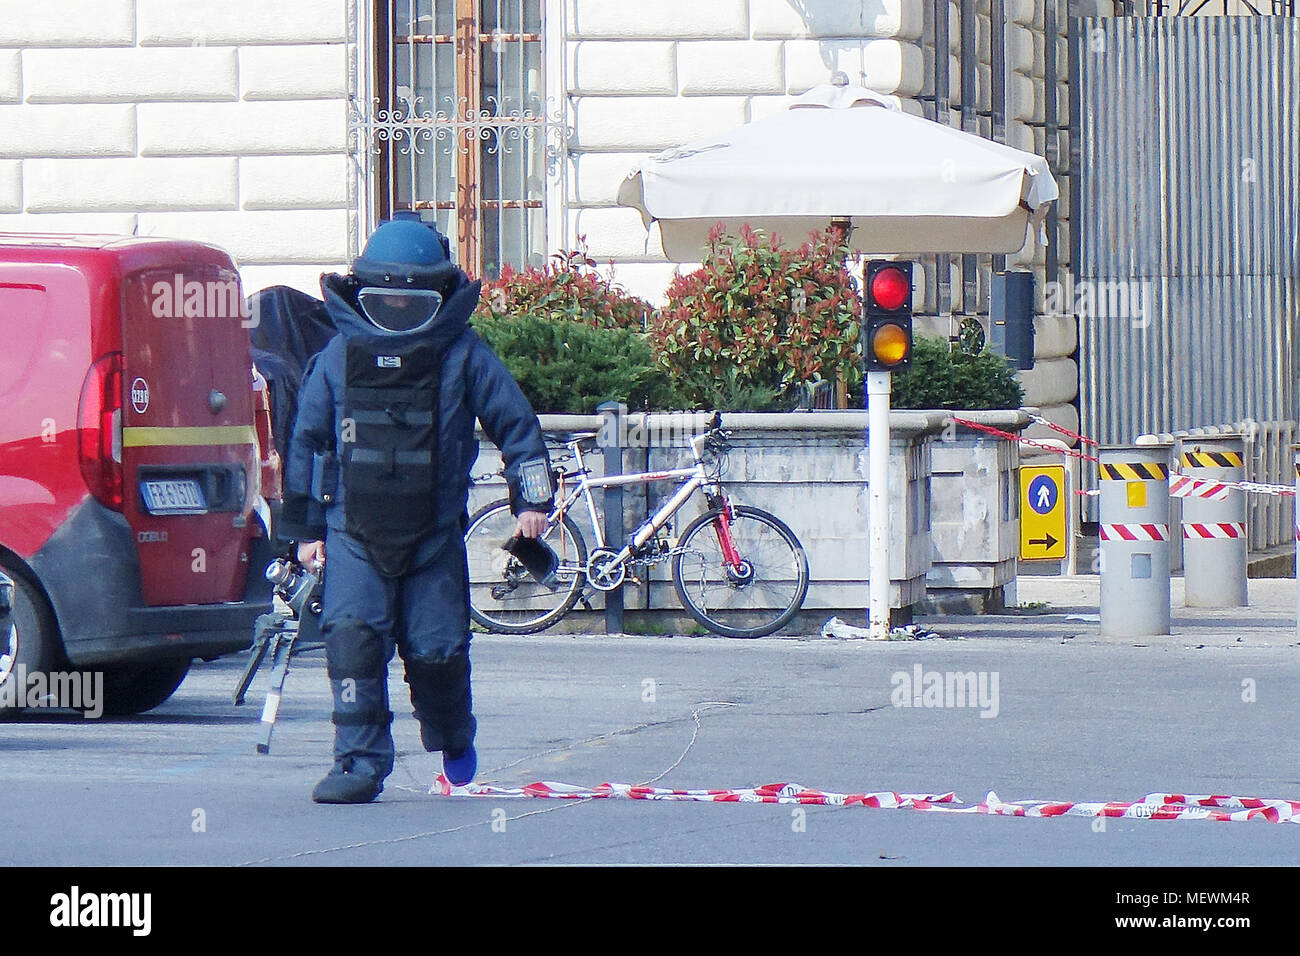 A suspect container sprouting wires in the flask-holder of a bicycle caused  a brief bomb scare at the US consulate in Florence, Italy. The bomb squad  opened the container with a water